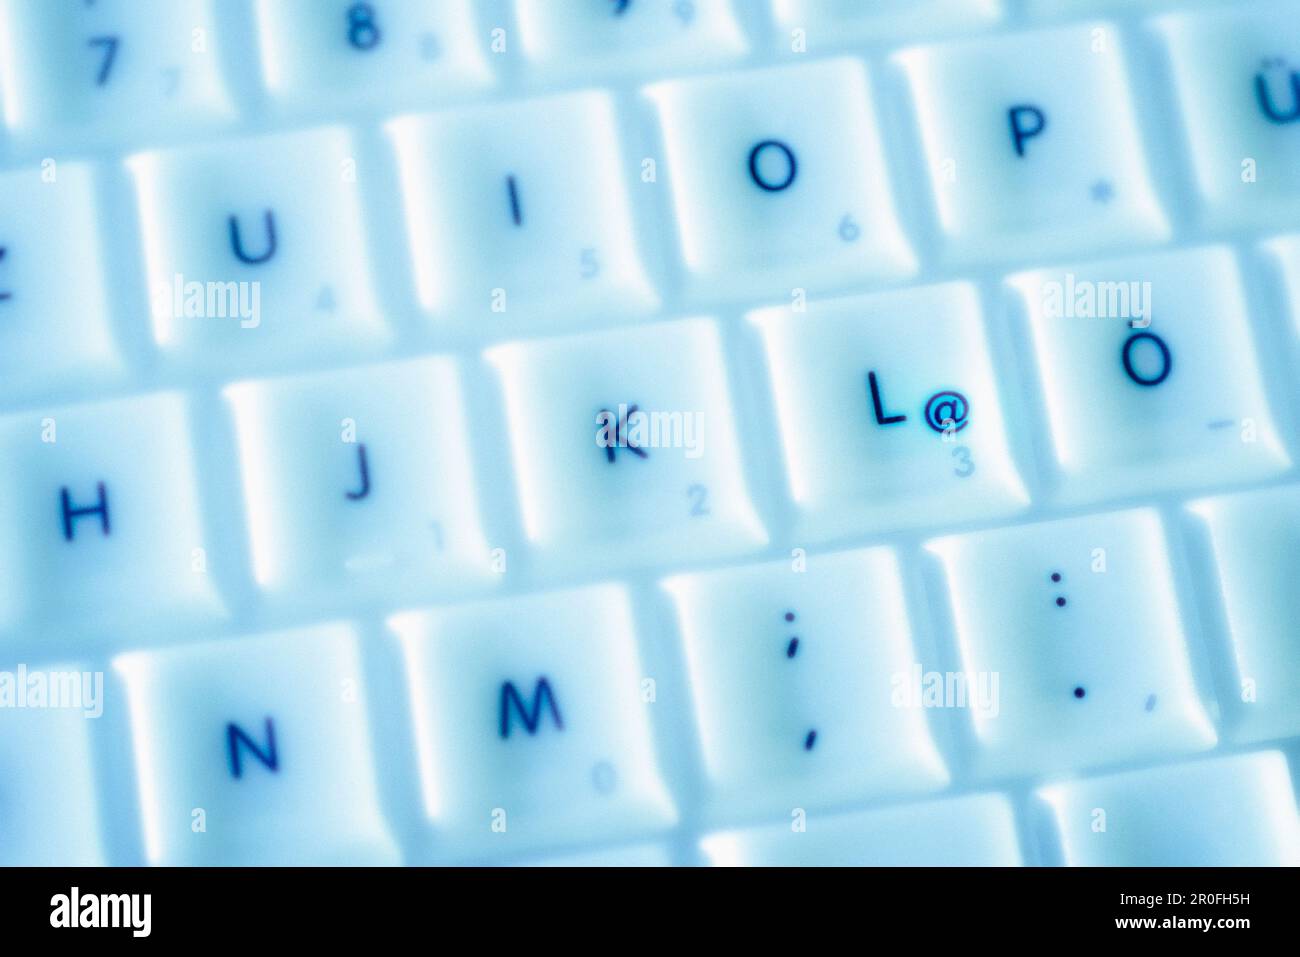 Keyboard,Appel,@ sign Stock Photo